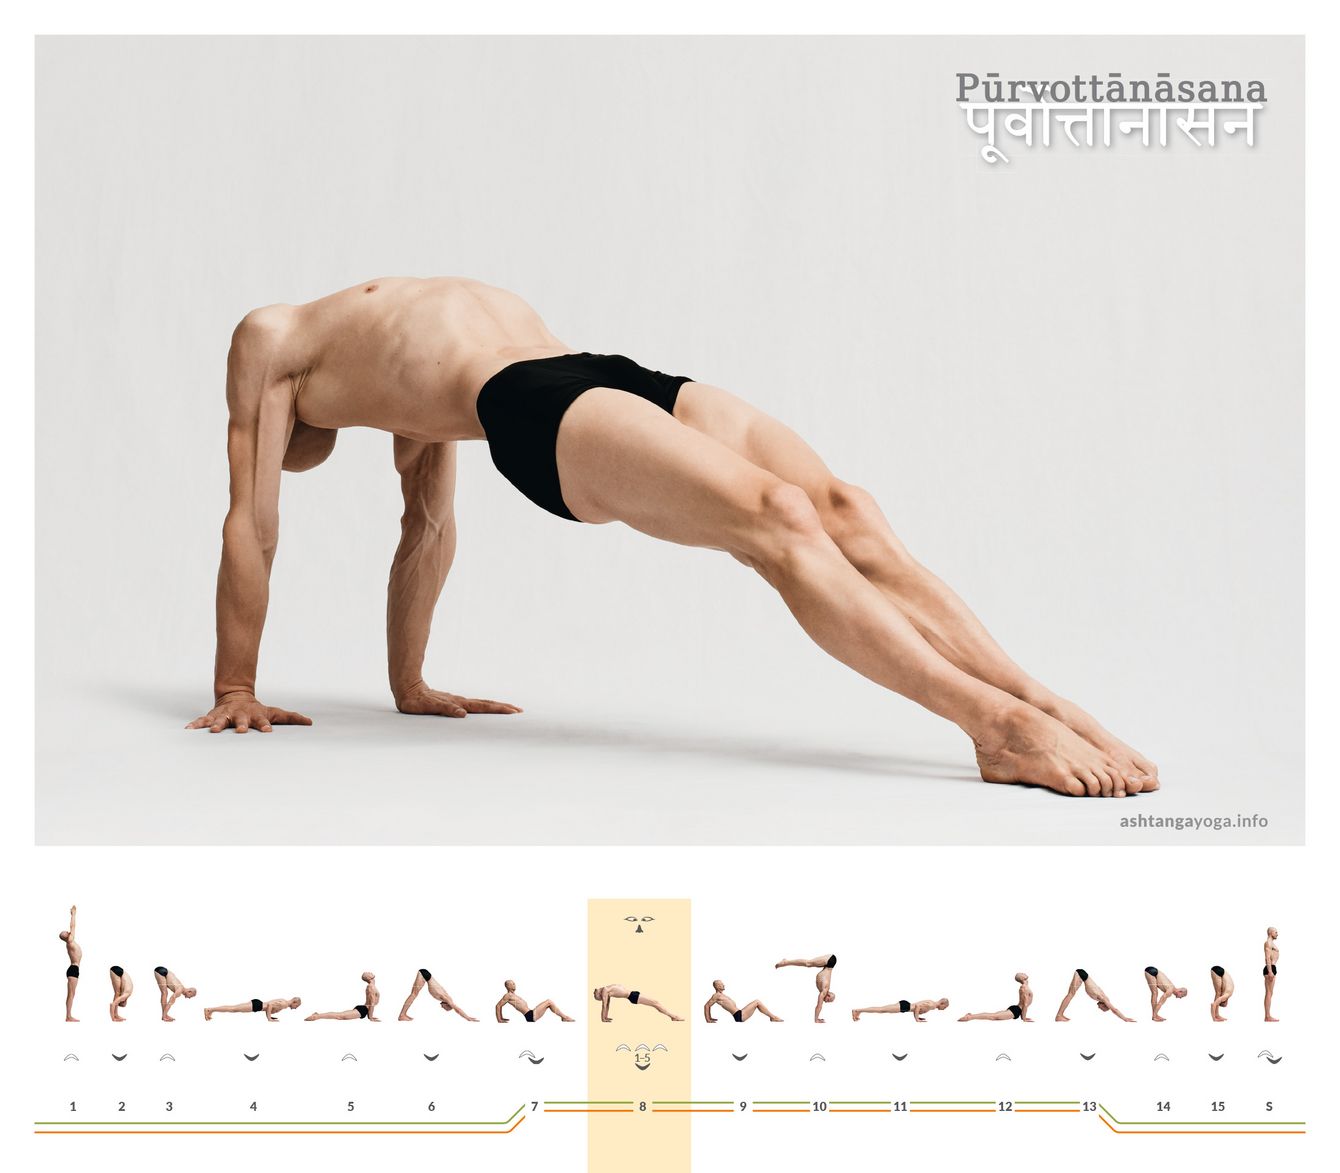 Purvottanasana: Pose to stretch the front of the body